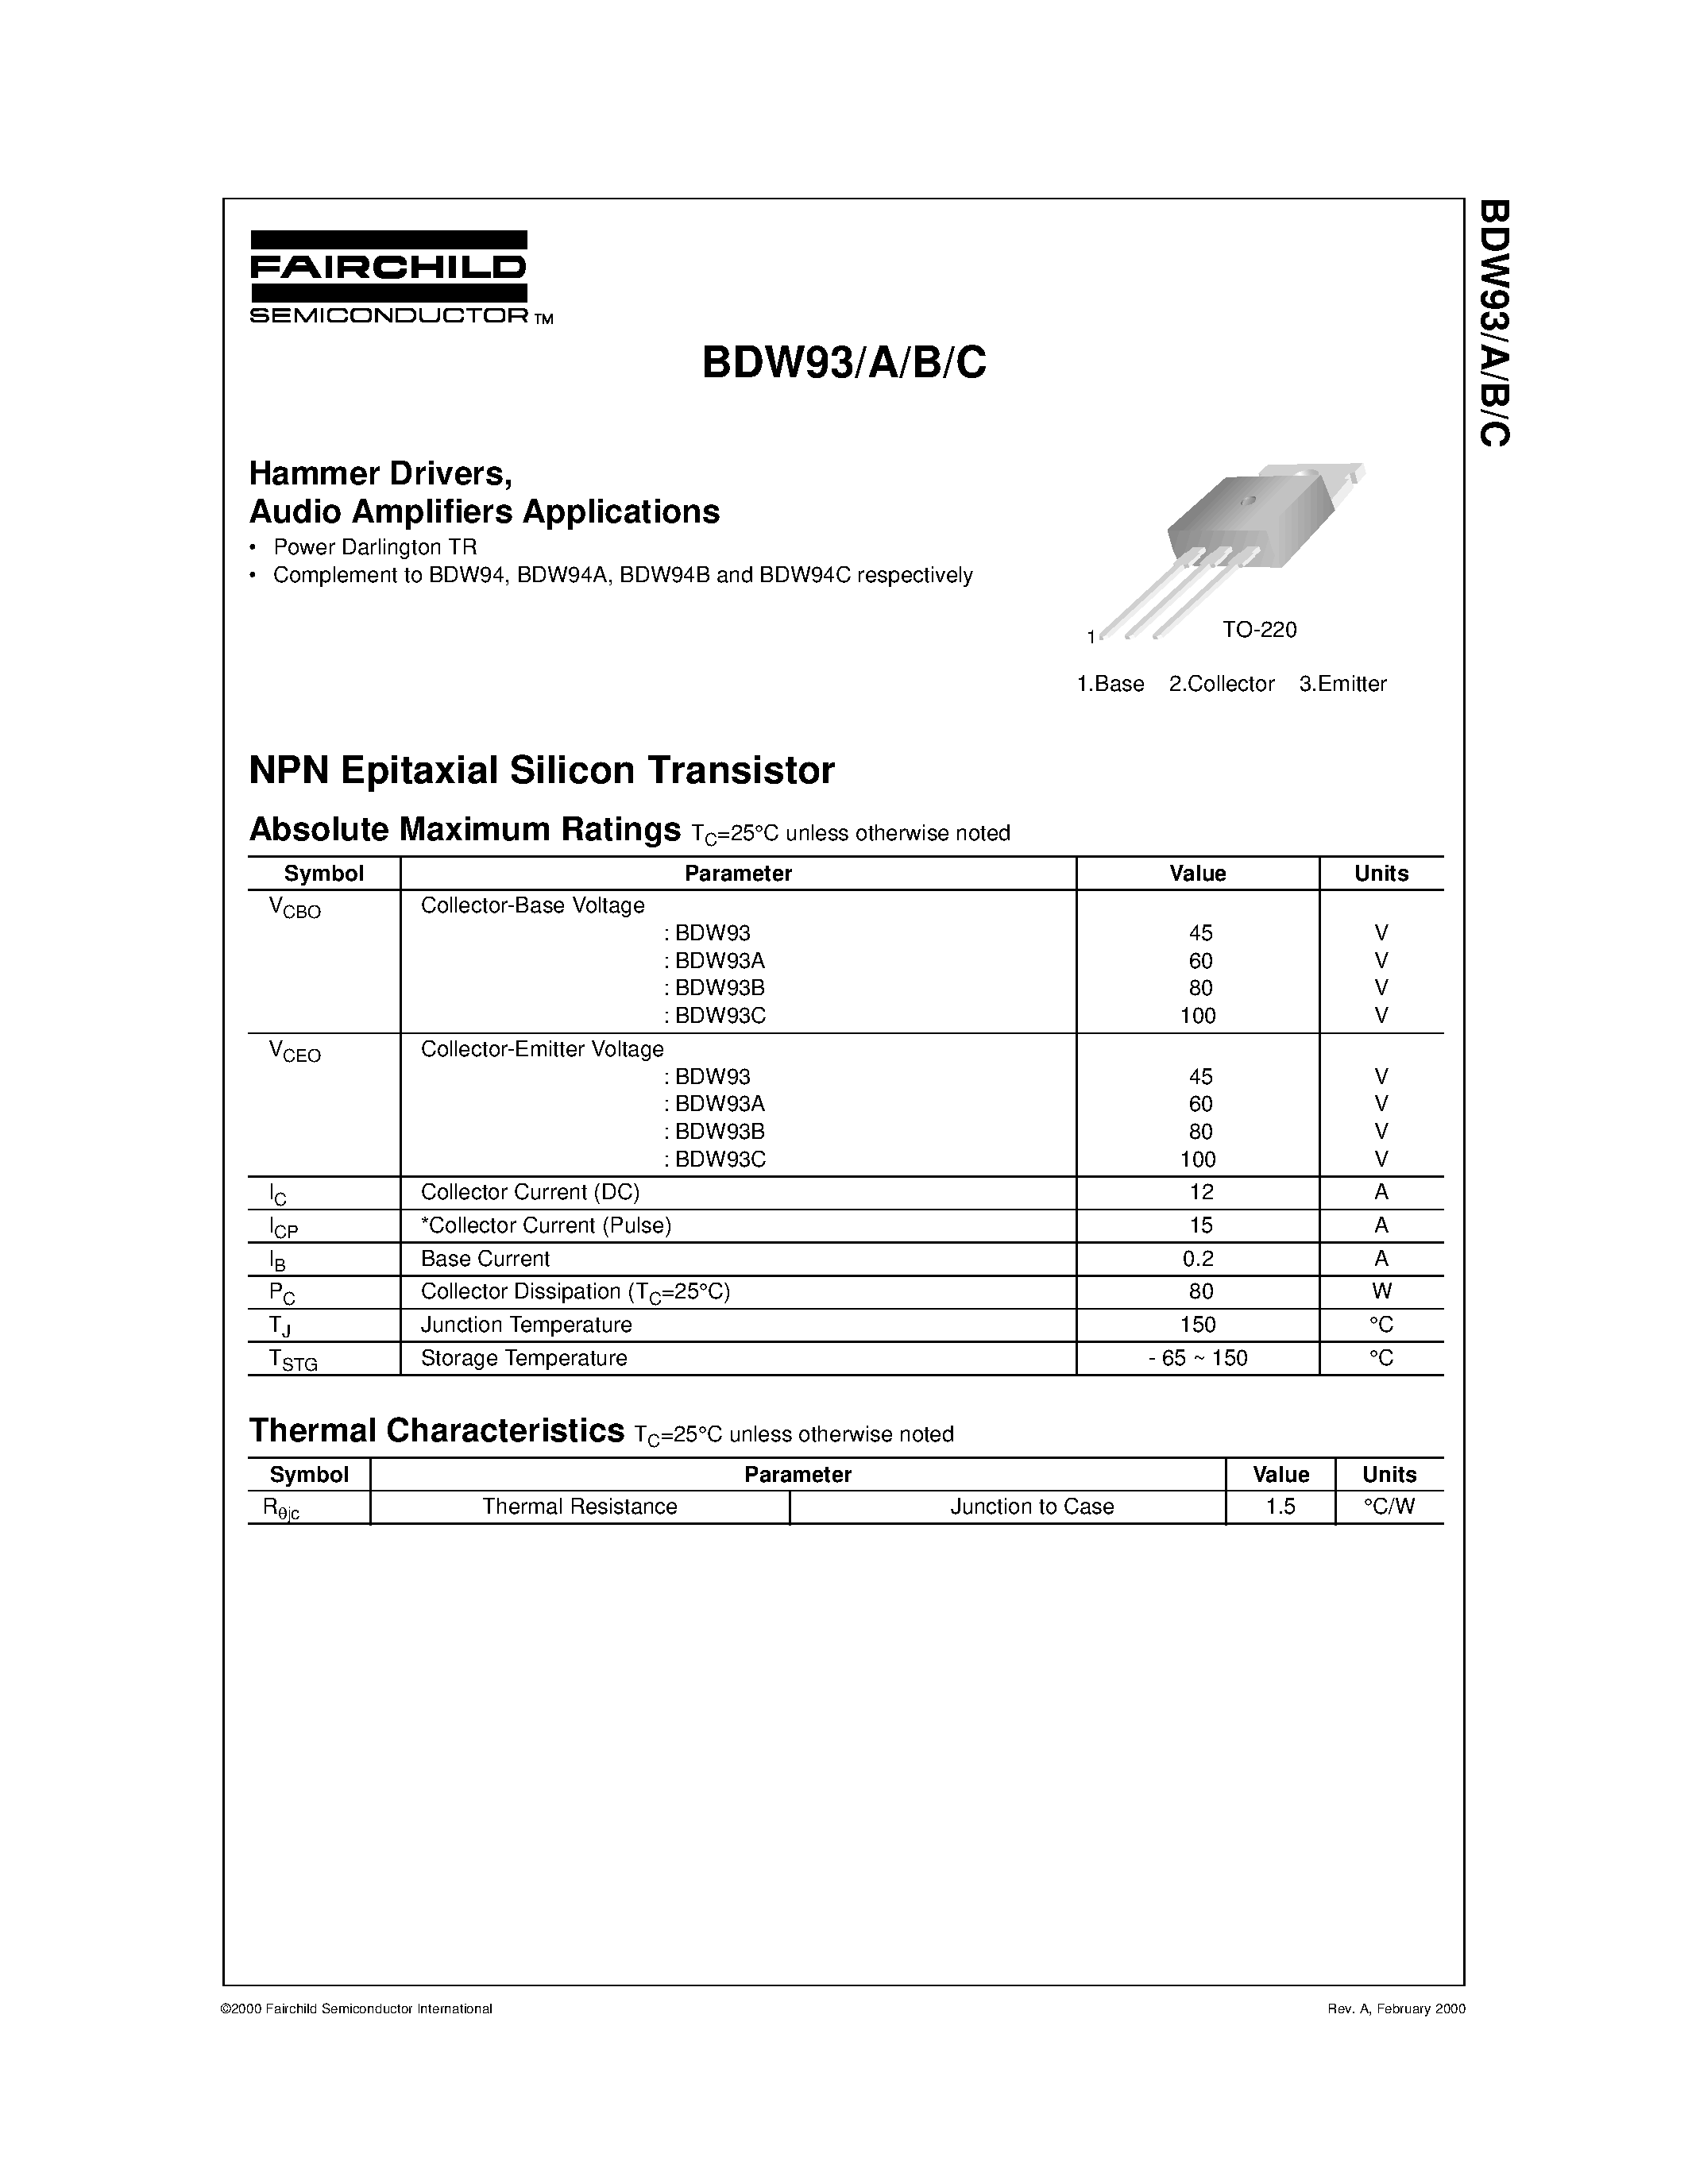 Datasheet BDW93 - Hammer Drivers/ Audio Amplifiers Applications page 1